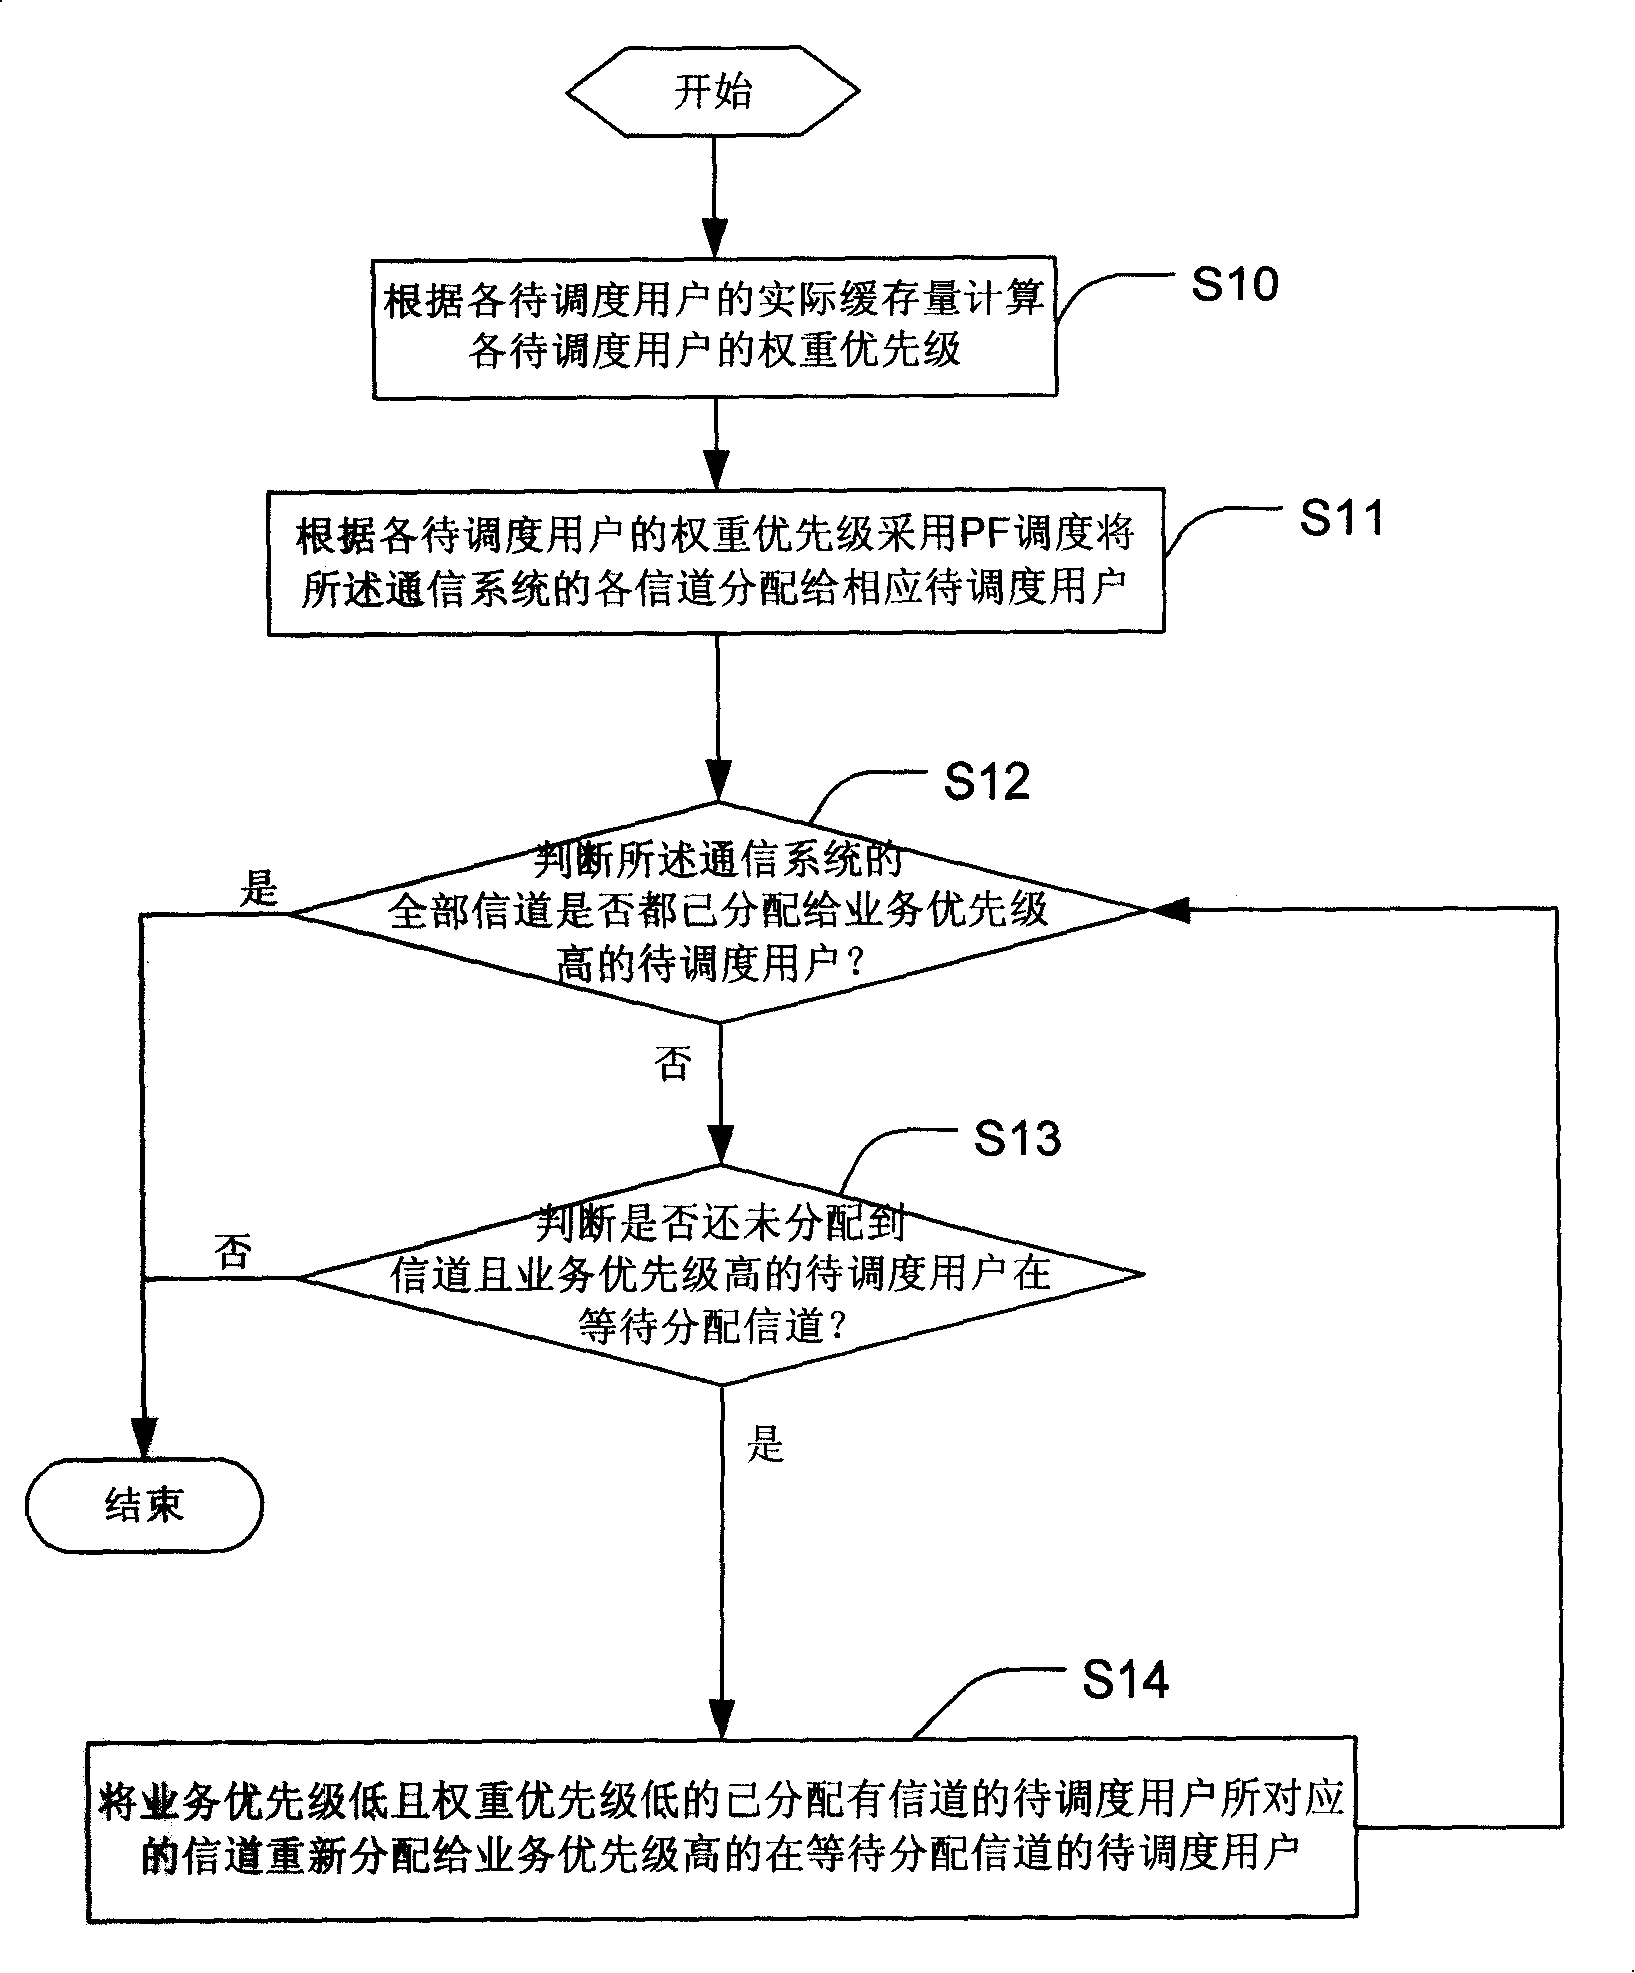 Method for multi-business scheduling based on communication system real buffer memory